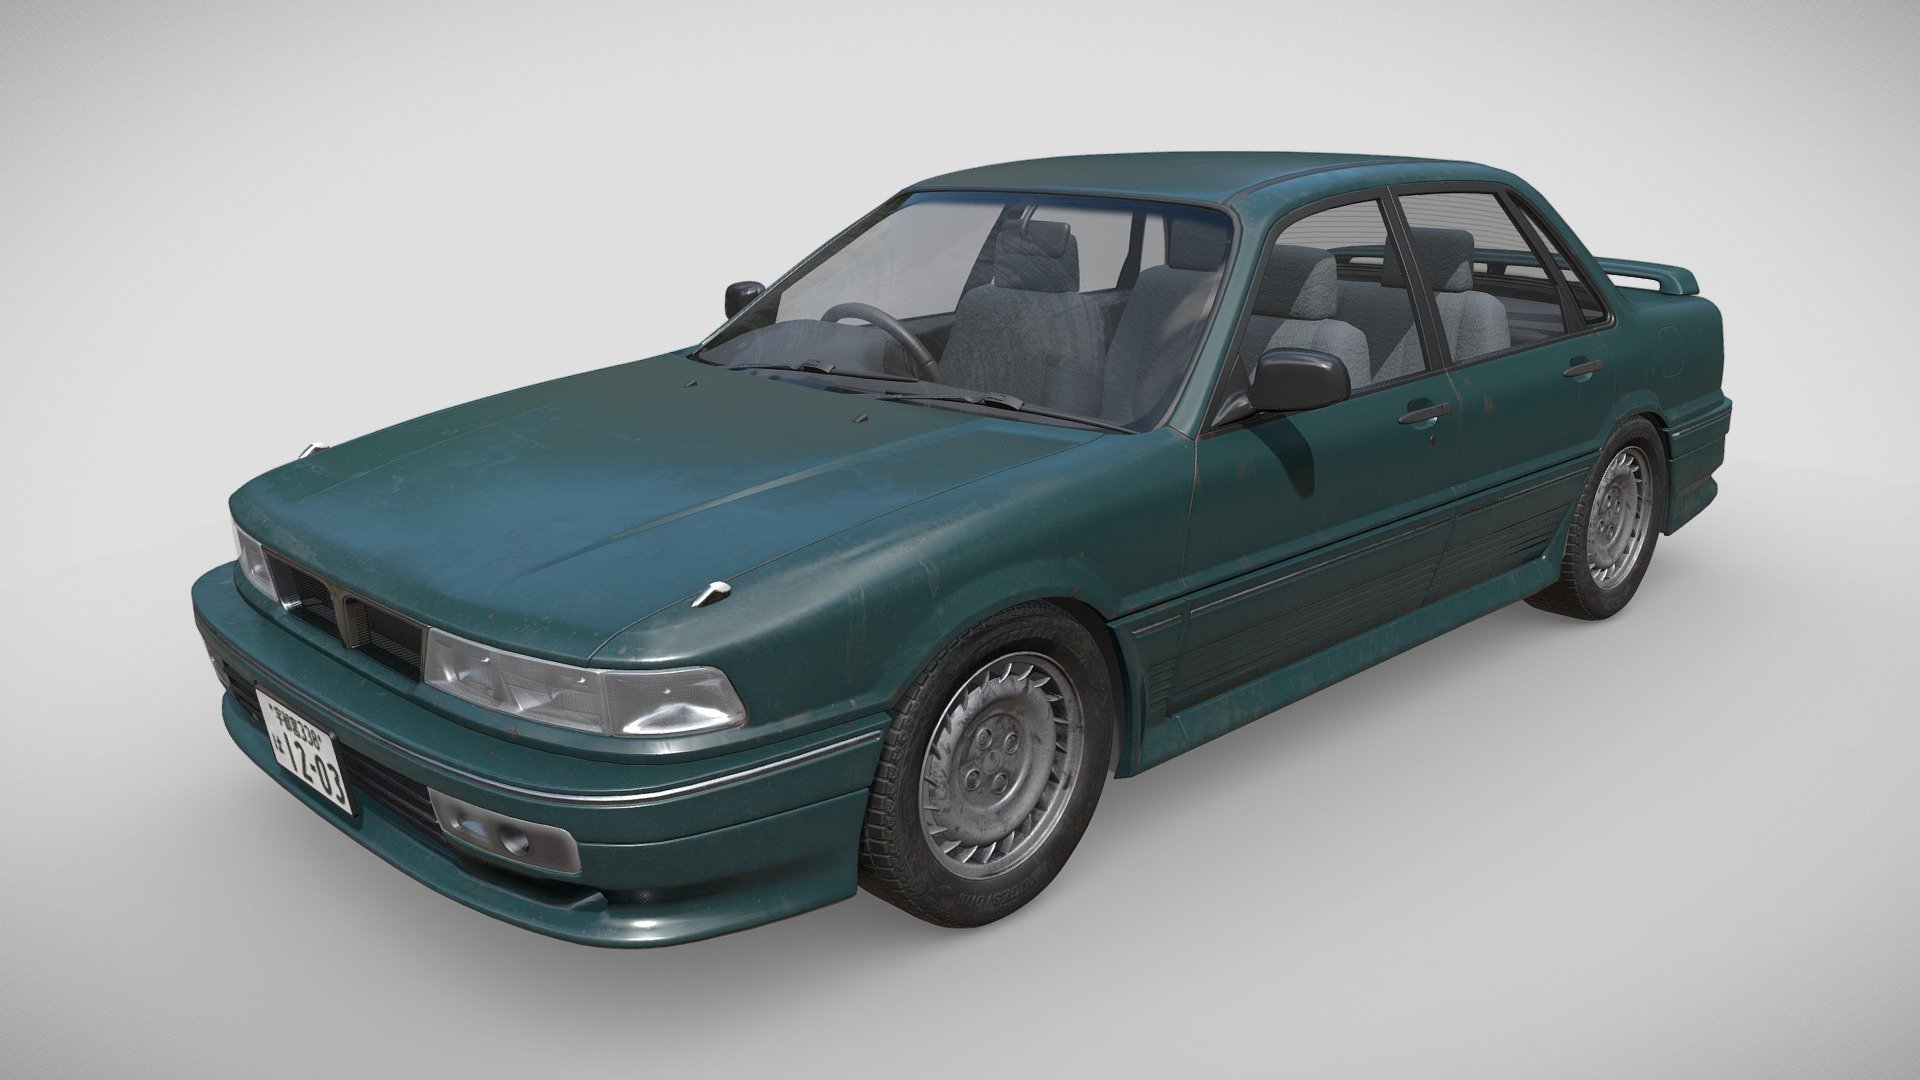 Mitsubishi Galant VI (1987-1992)
Game-ready midle-poly vehicle model. The model consists of 5 parts and has 5 texture sets - body, glass, bottom, parts, interior. Car body and other parts (exterior) have 4096p texture resolution. The rest of the texture has a resolution of 512/2048 pixels. PBR Texture.
ArtStation work page with this model - https://www.artstation.com/artwork/D5vy1E - Mitsubishi Galant 6 - Buy Royalty Free 3D model by Guantanamera 3d model